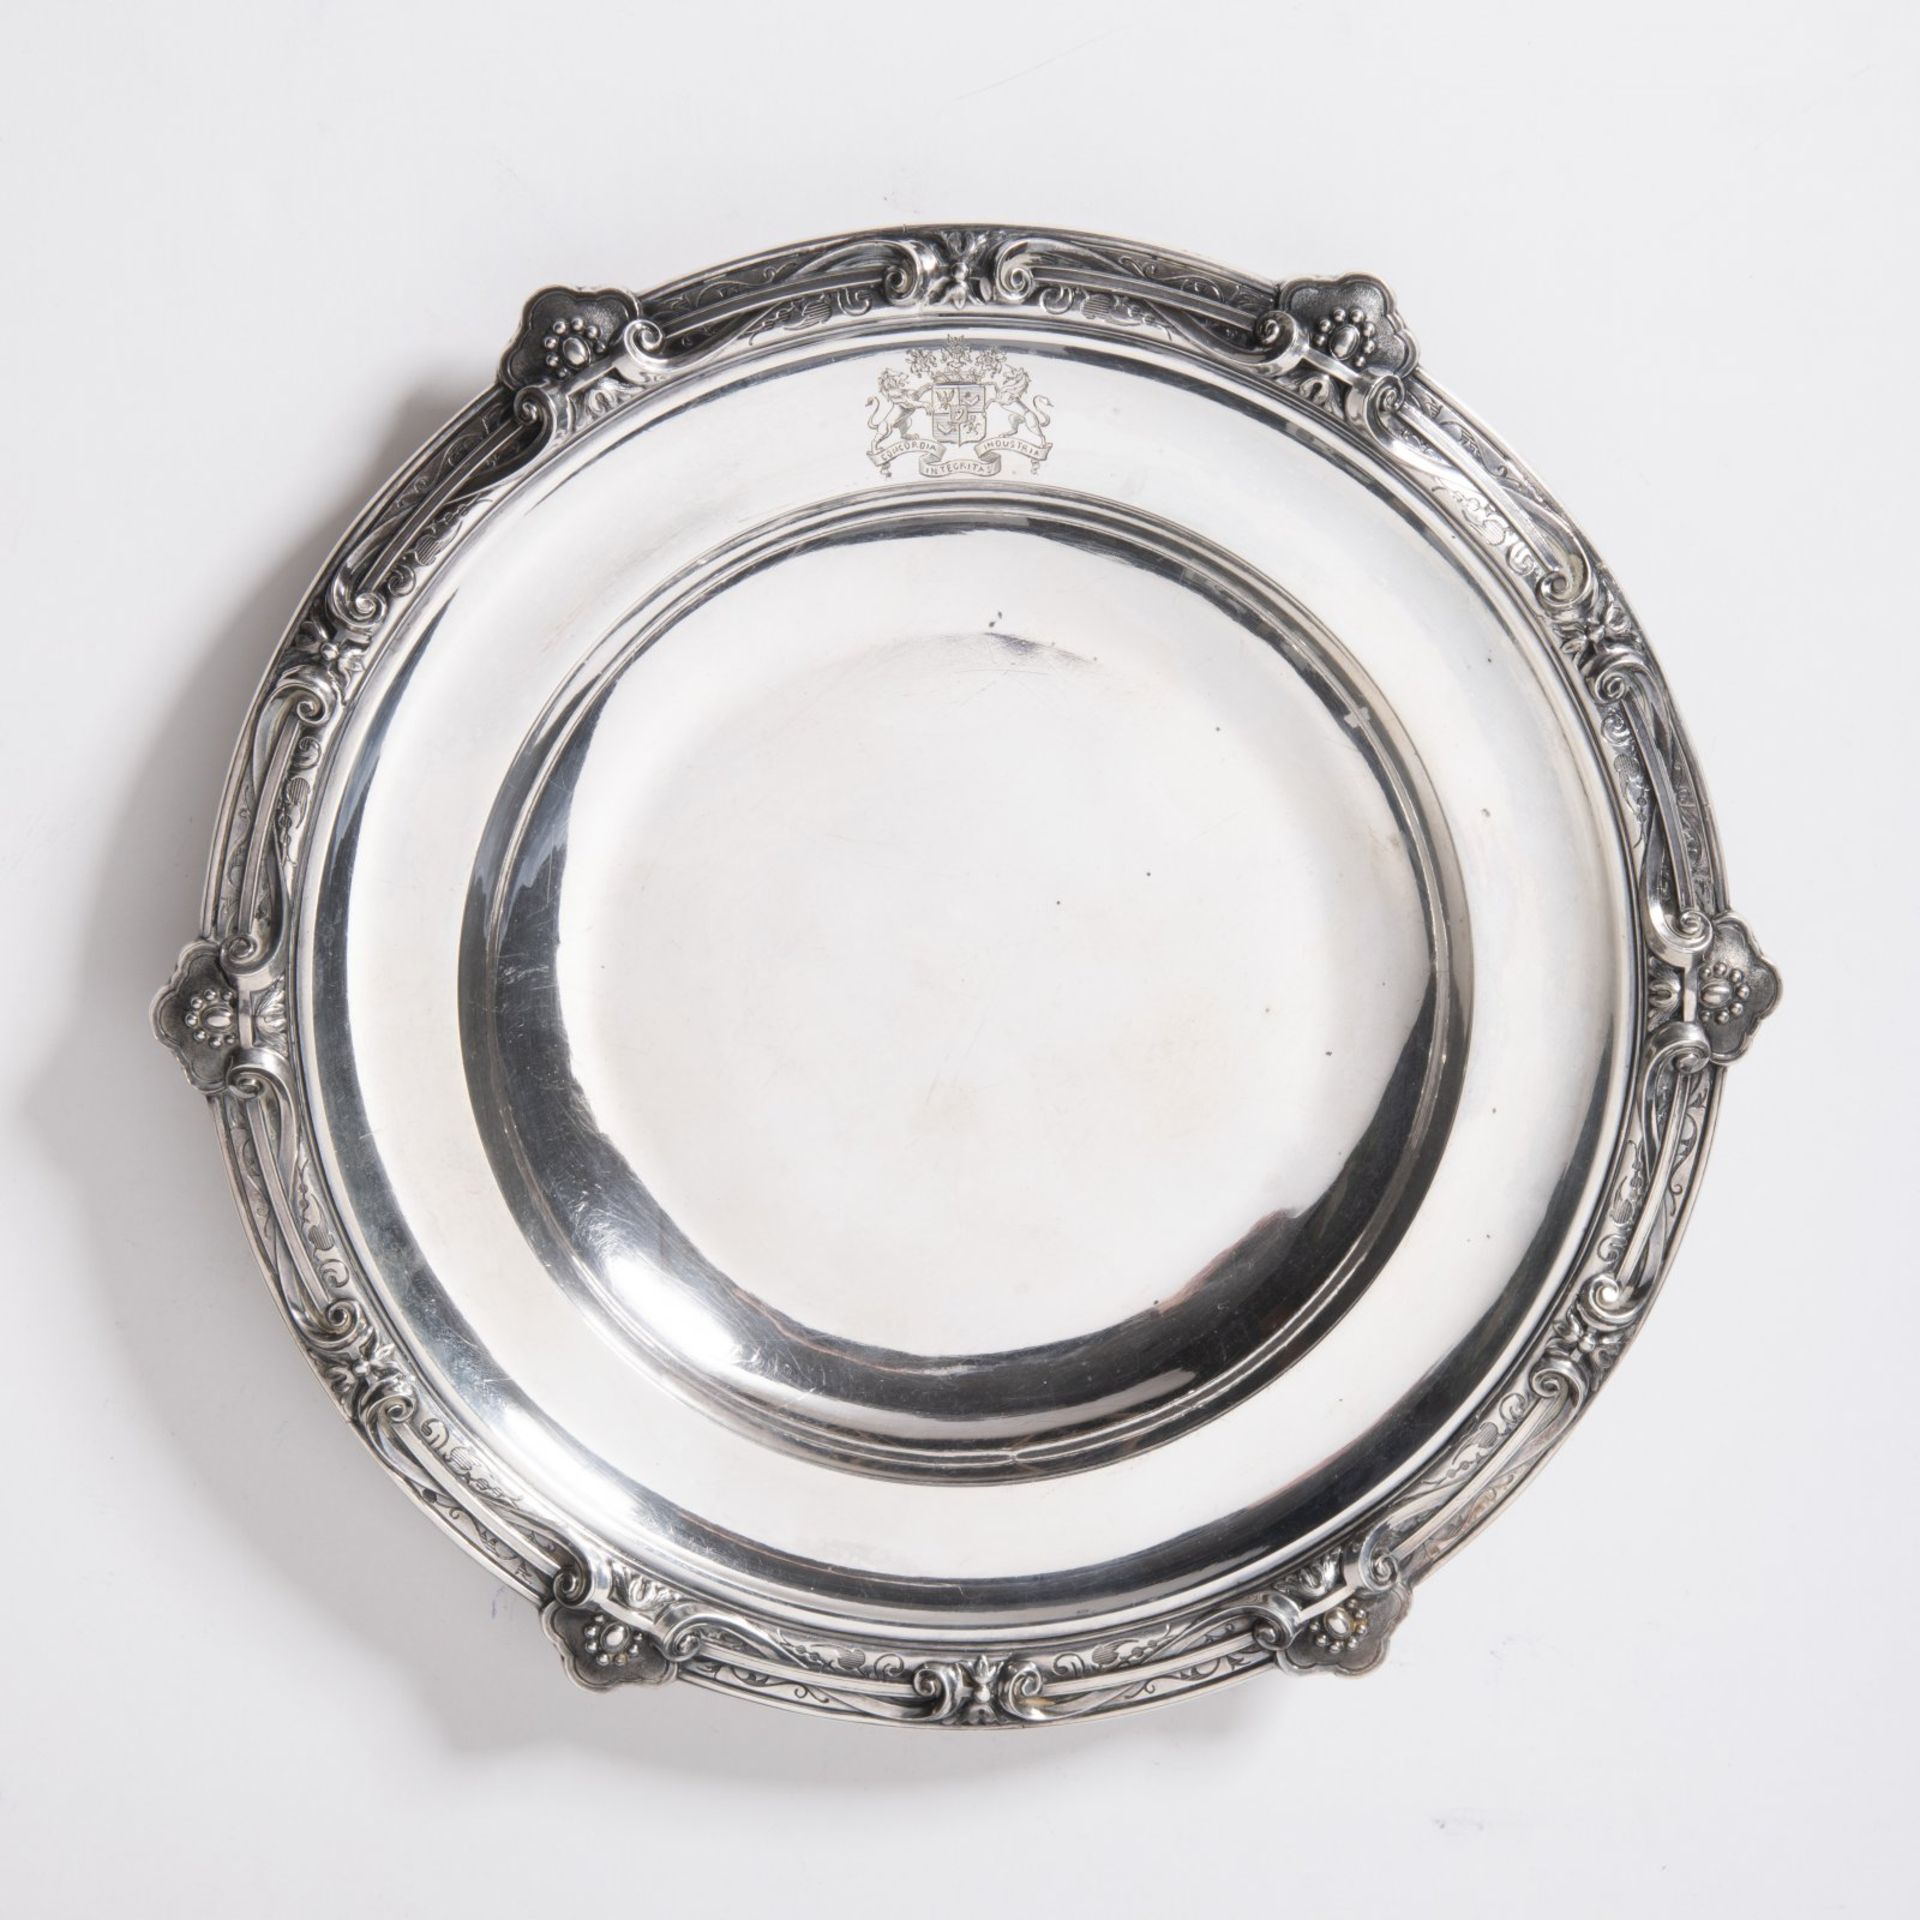 SILVER PLATE WITH A ROTHSCHILD COAT OF ARMS 1840 - 1879 Silver ⌀28.5 cm, 577 g Signed: Hallmarked "